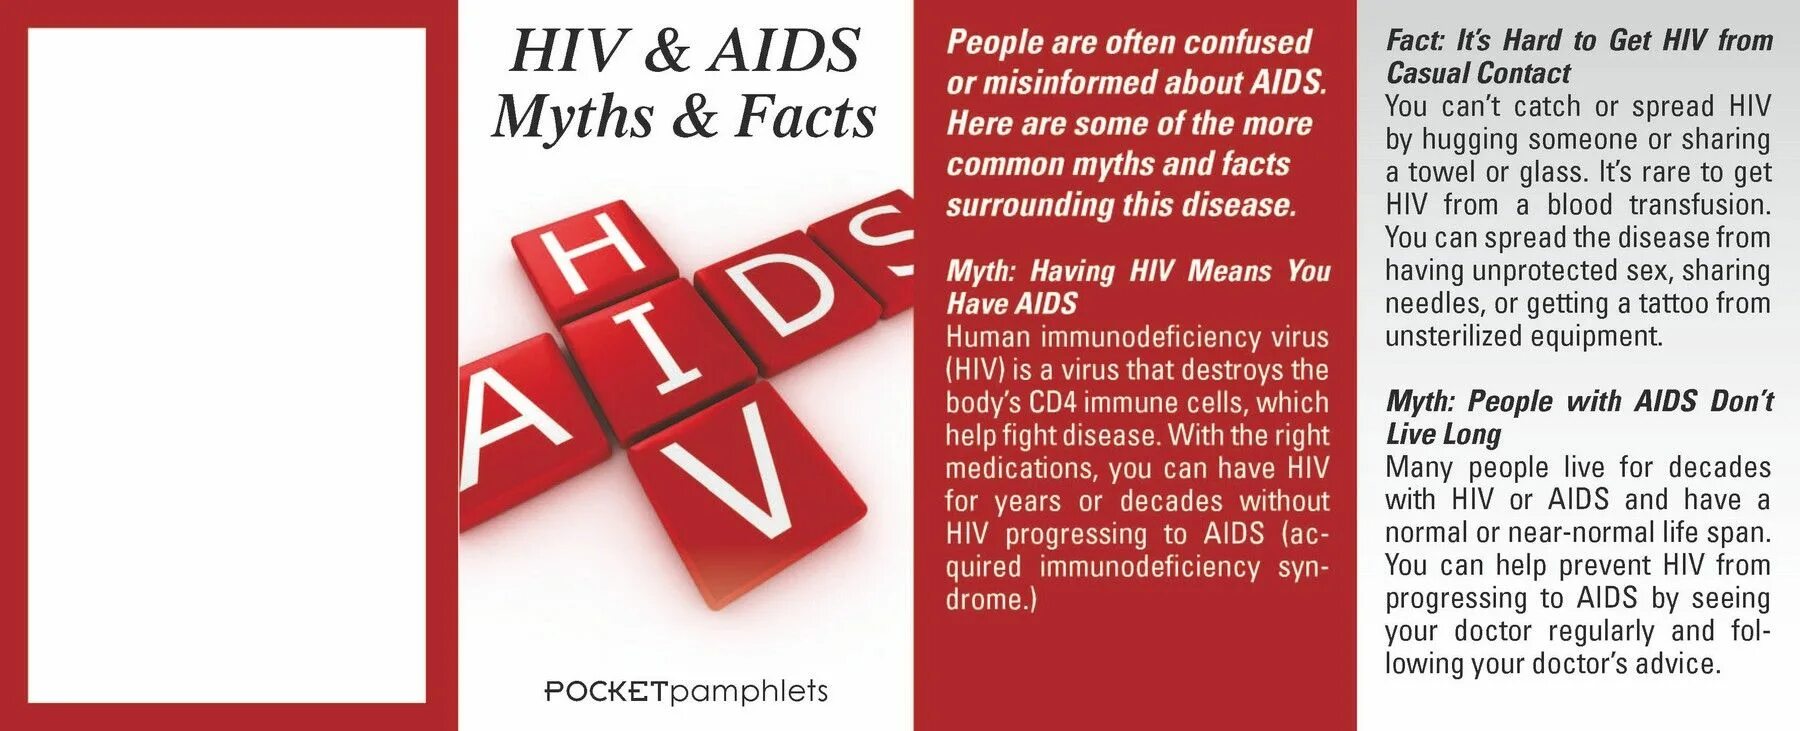 7 7 спид ап. About AIDS. HIV AIDS. Myths about HIV and AIDS. Pamphlet for HIV.